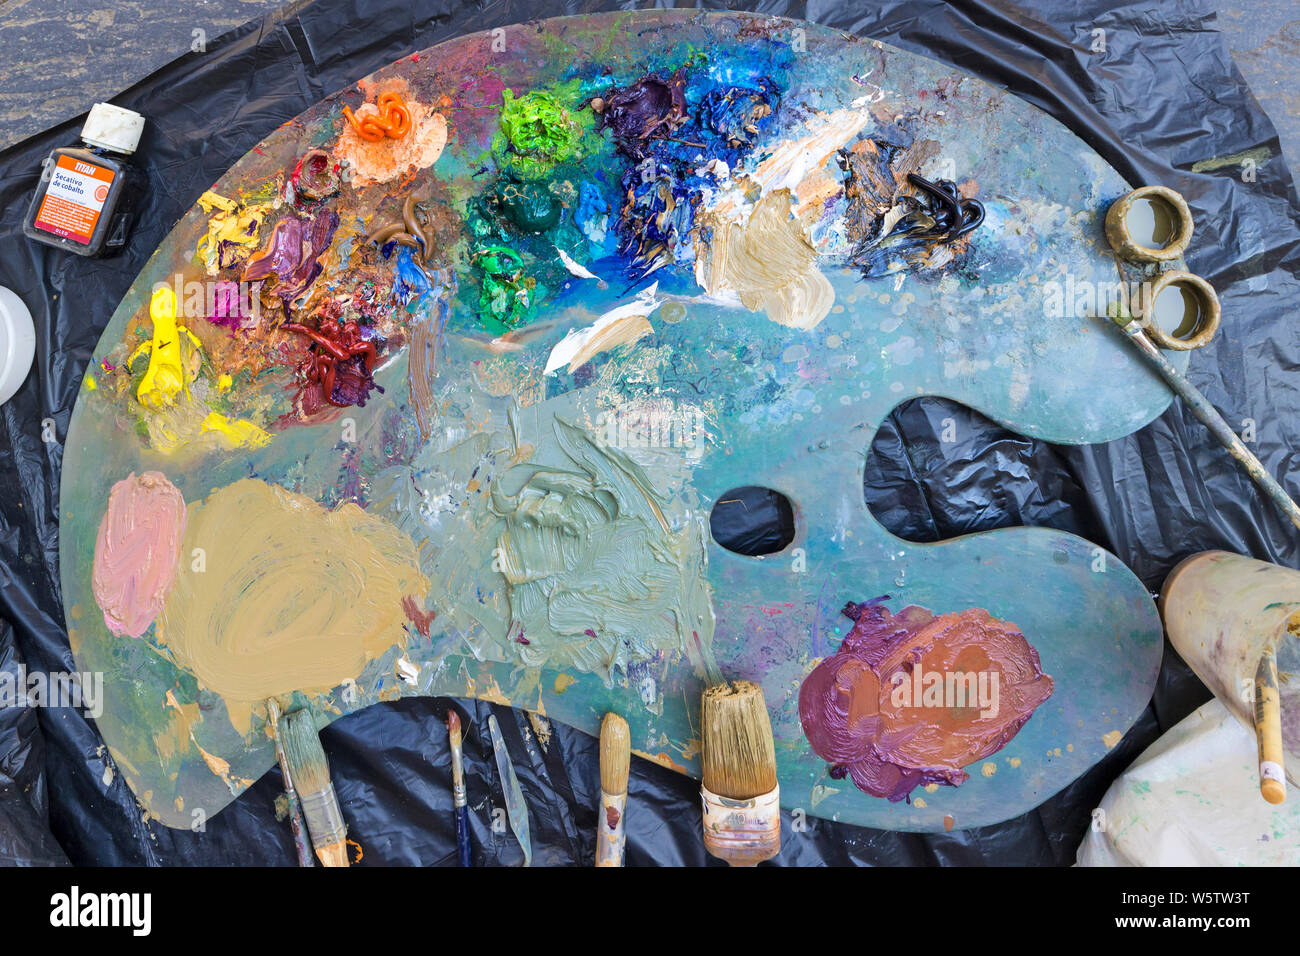 A Painter’s Palette with Paints and Brushes. Stock Photo